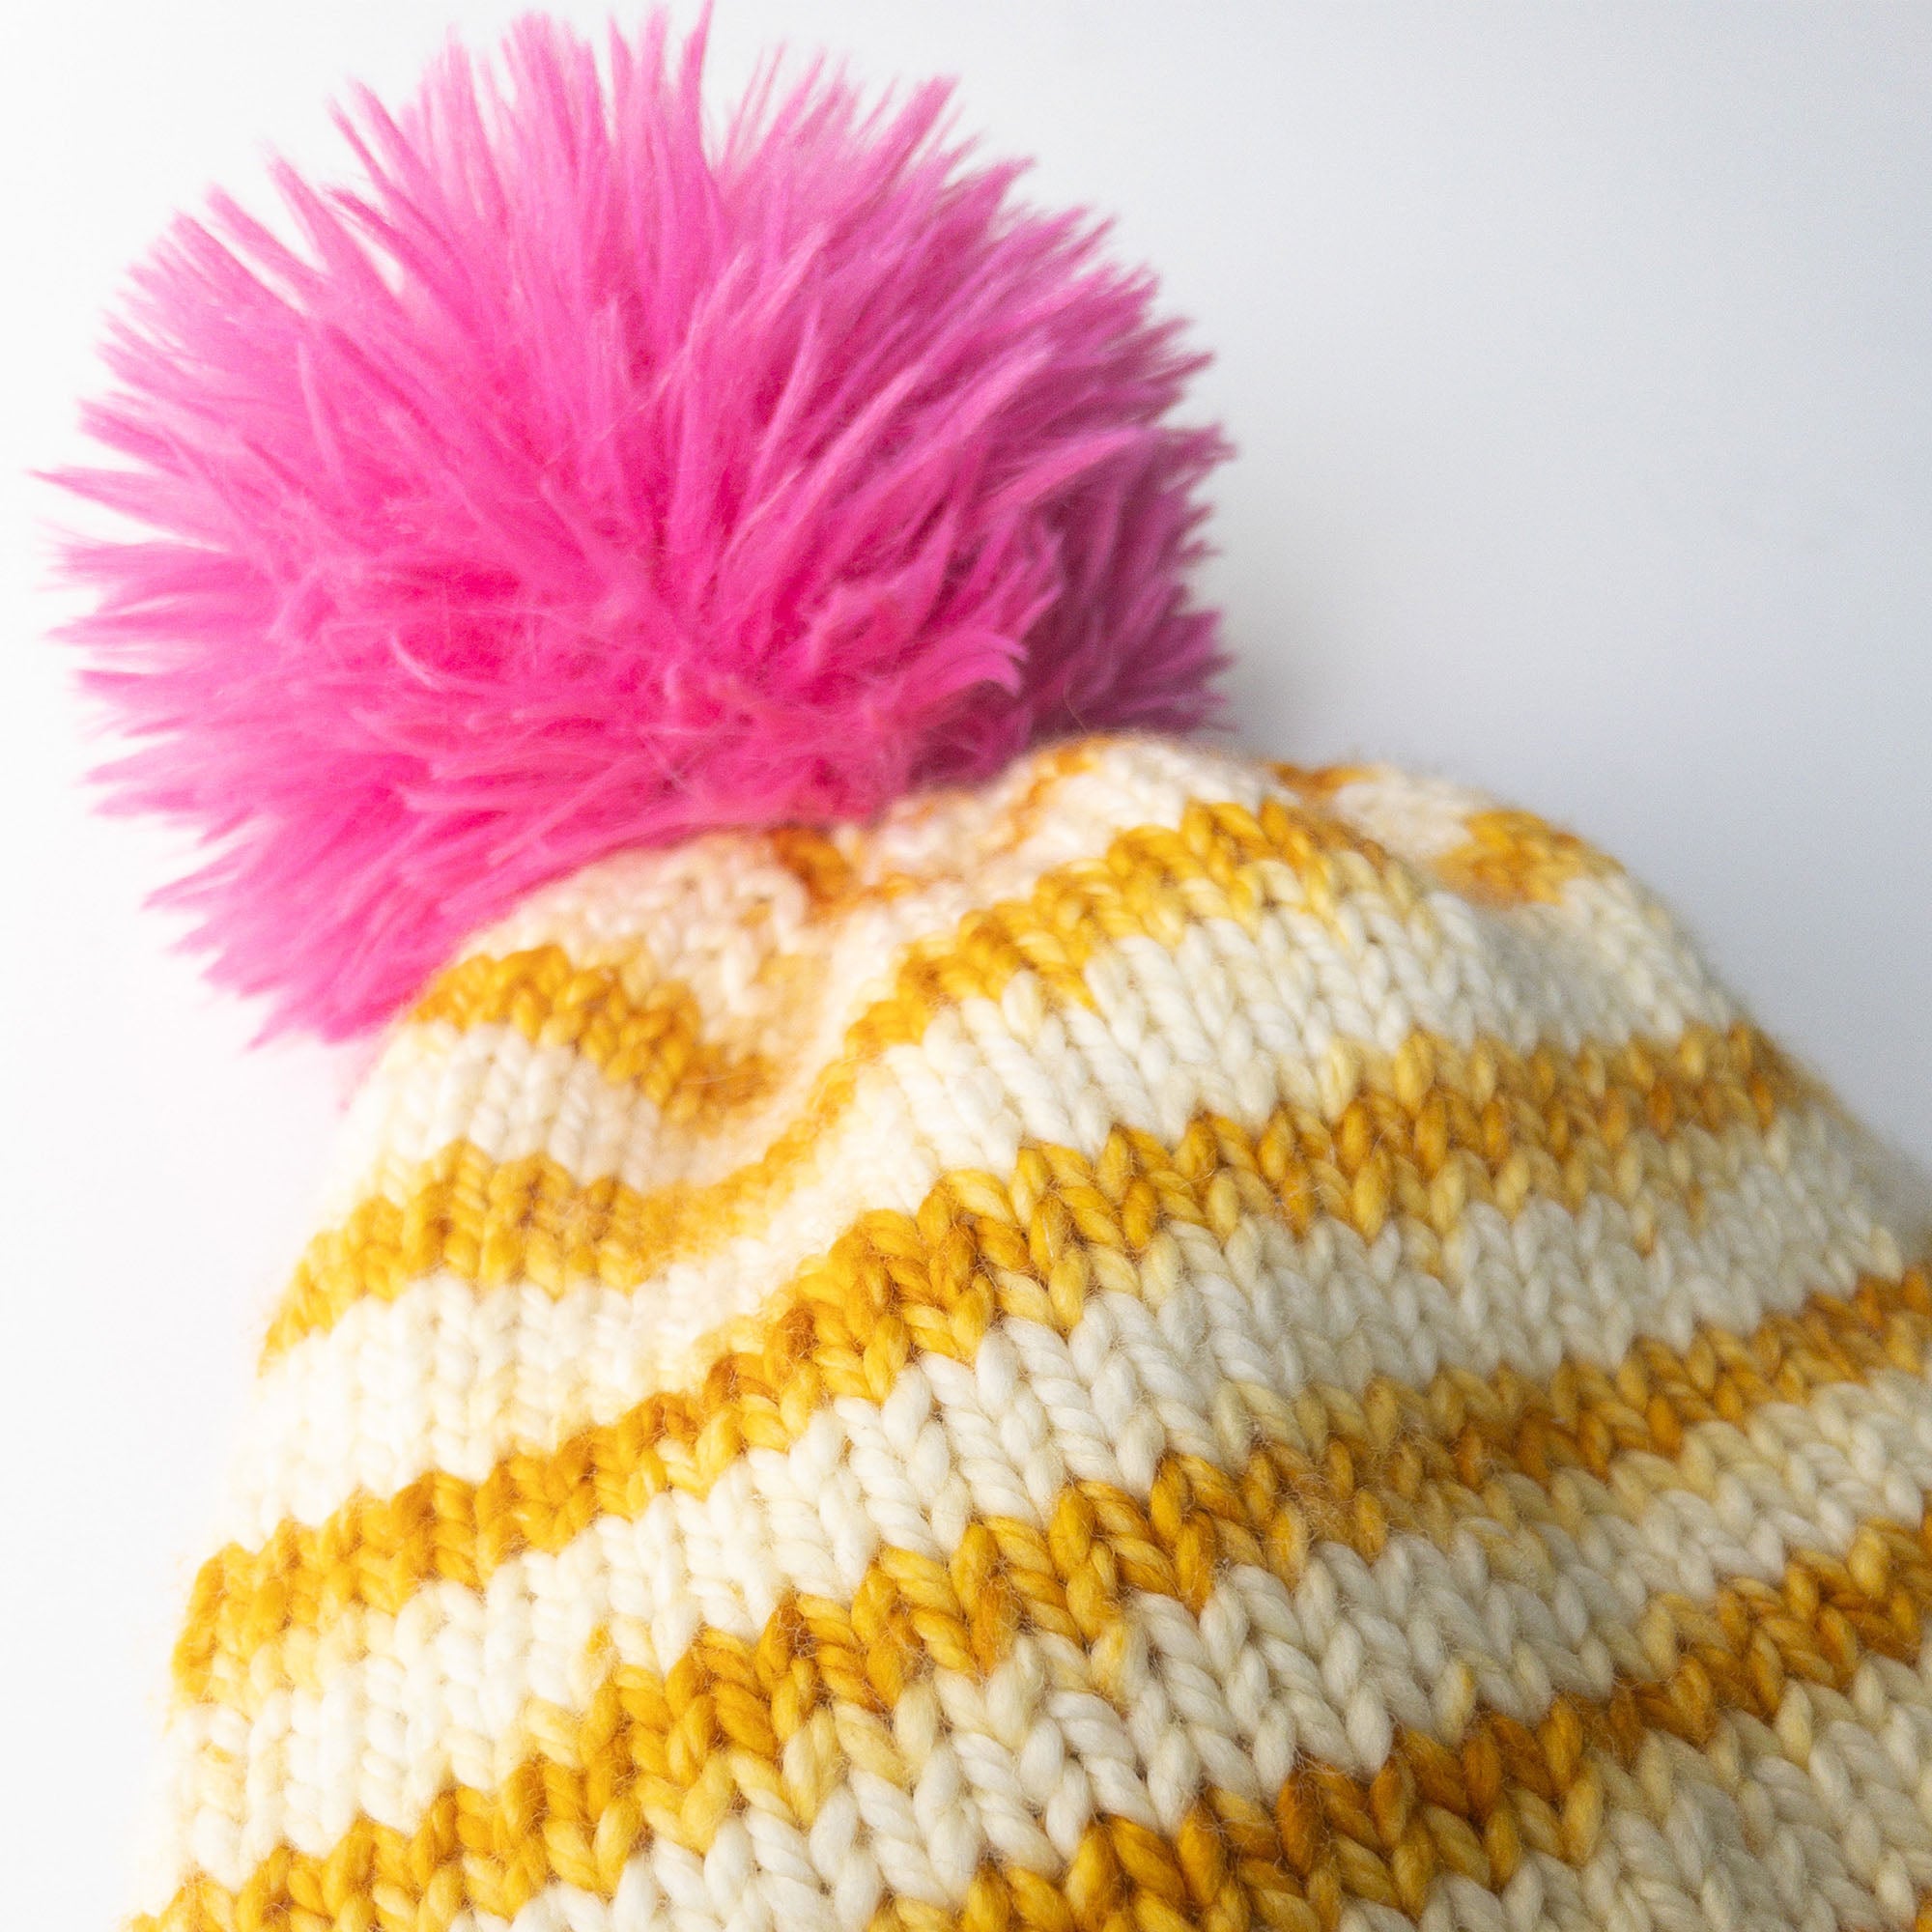 one-skein knitting project hat kit in vanilla cream and butterscotch (mustard) yellow that self-stripes on the free knitting hat pattern we recommend; also has a fuschia pink faux fur pompom topping it off